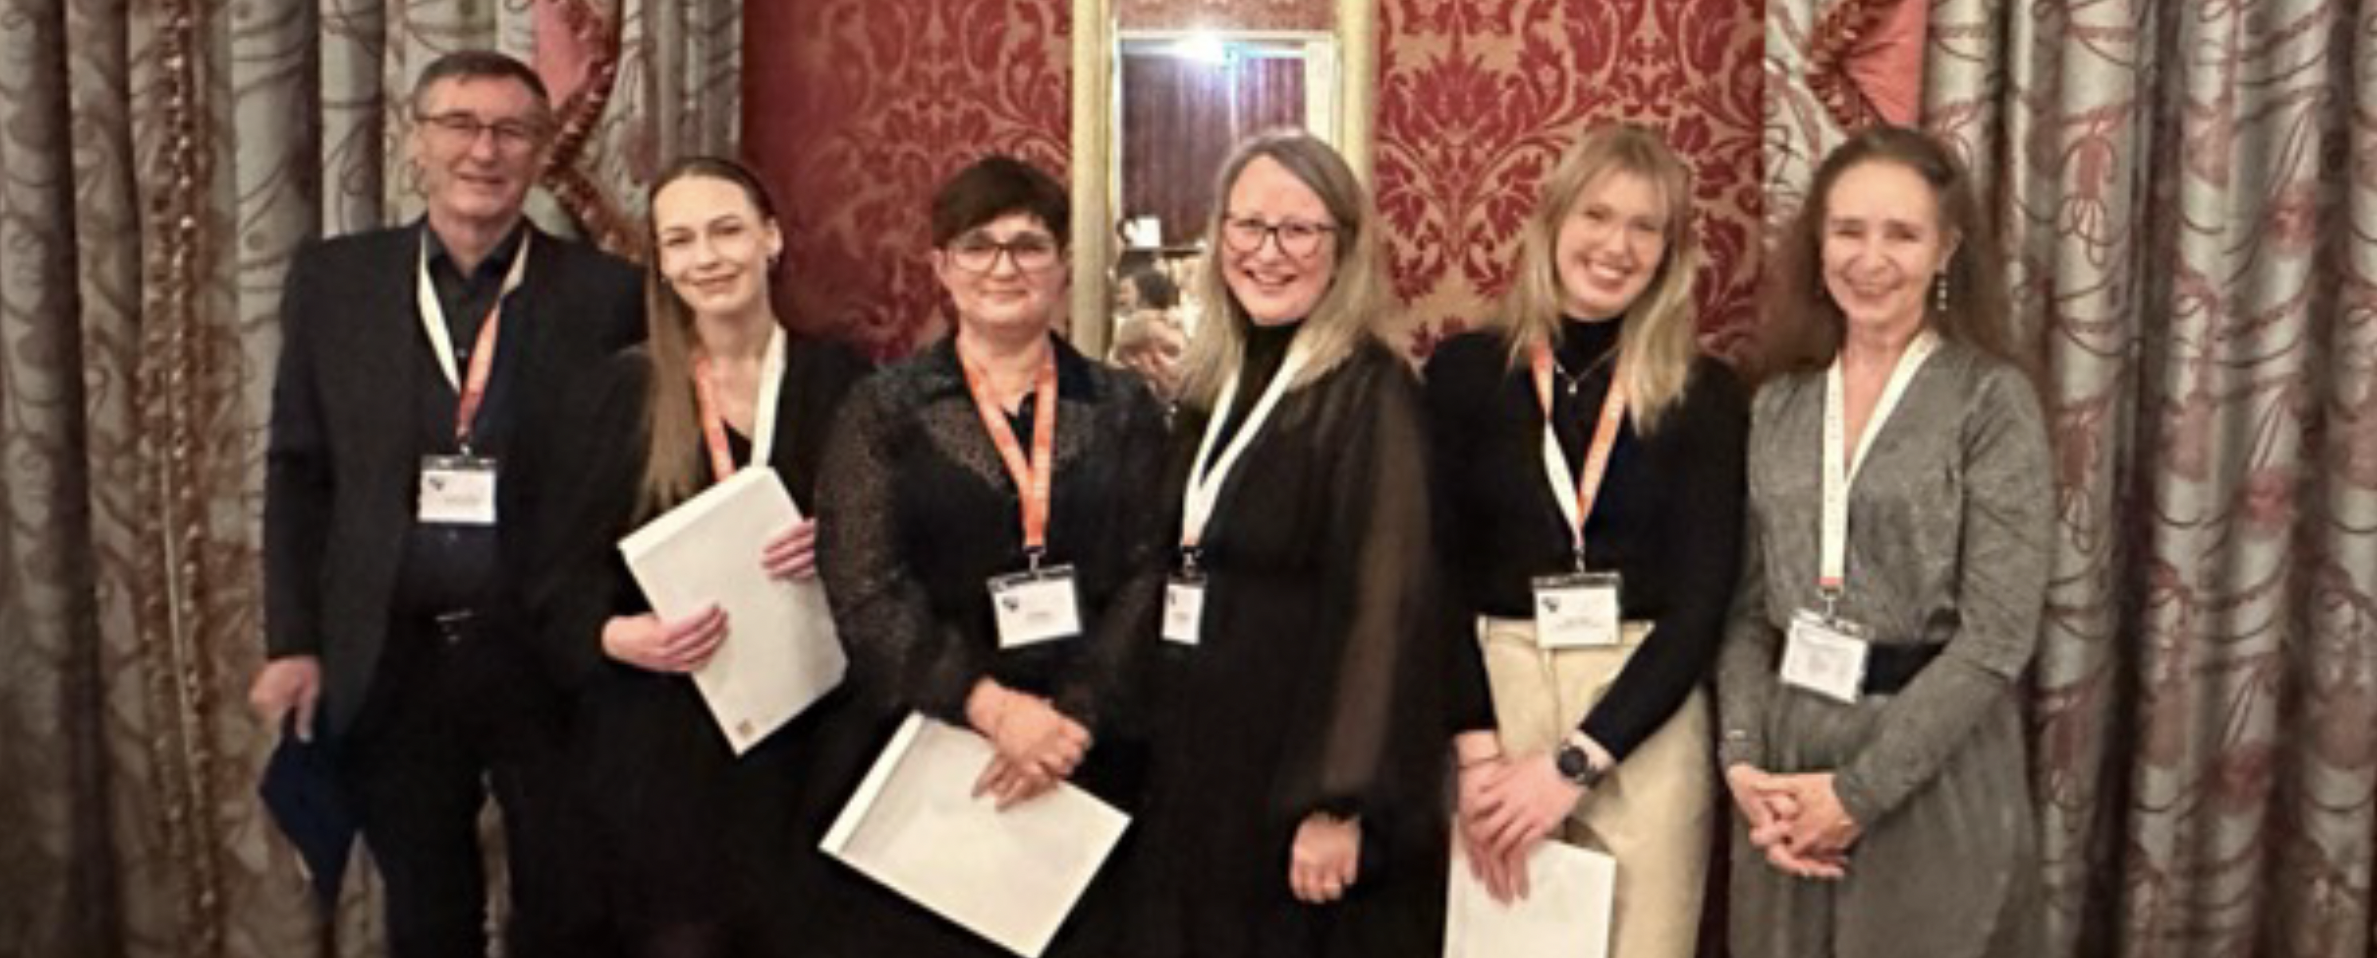 Poster winners of the The 26th Norwegian Symposium on Chromatography with the poster committee: Eric Tollnes, Agnethe Bæverud (1st place), Lisa Sylten (1st runner-up), Helle Malerød-Fjeld, Marit Huizer (2nd runner-up) and Karina Langseth-Manrique.